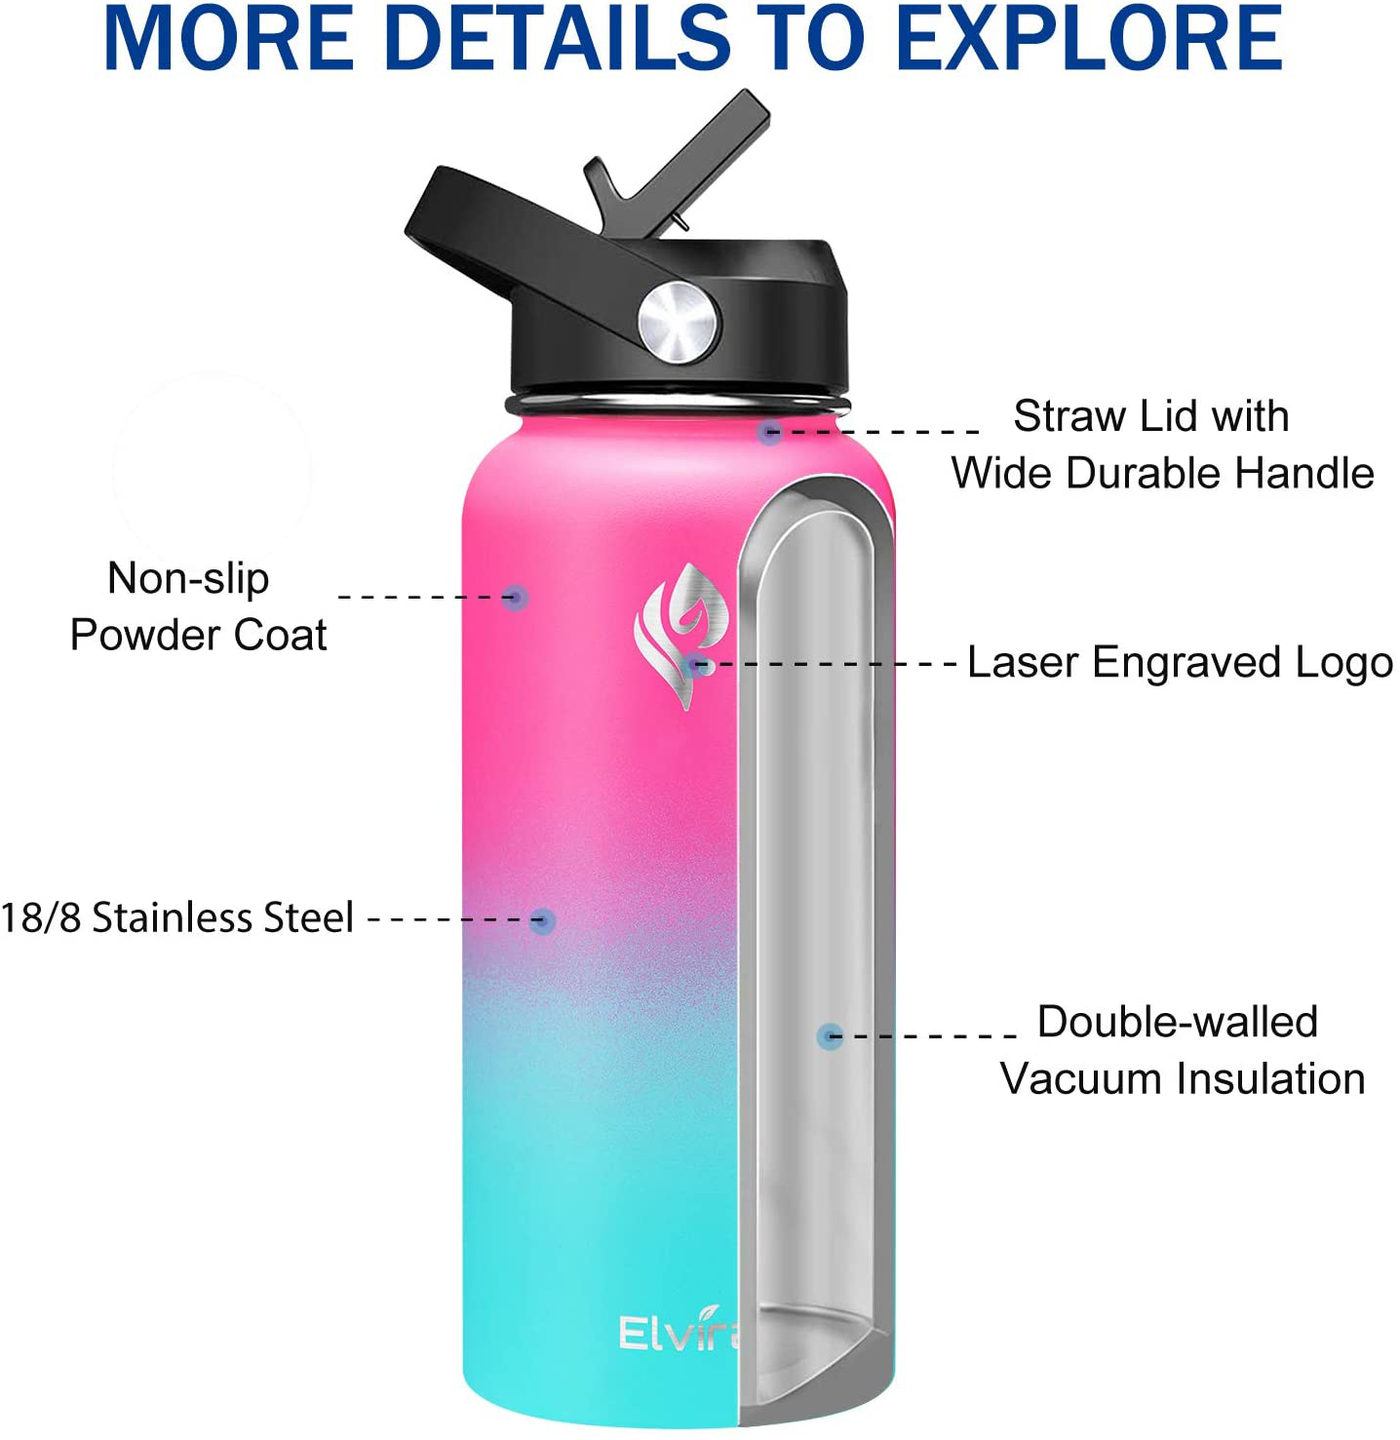 Elvira 32oz Vacuum Insulated Stainless Steel Water Bottle with Straw & Spout Lids, Double Wall Sweat-Proof BPA Free to Keep Beverages Cold for 24Hrs or Hot for 12Hrs